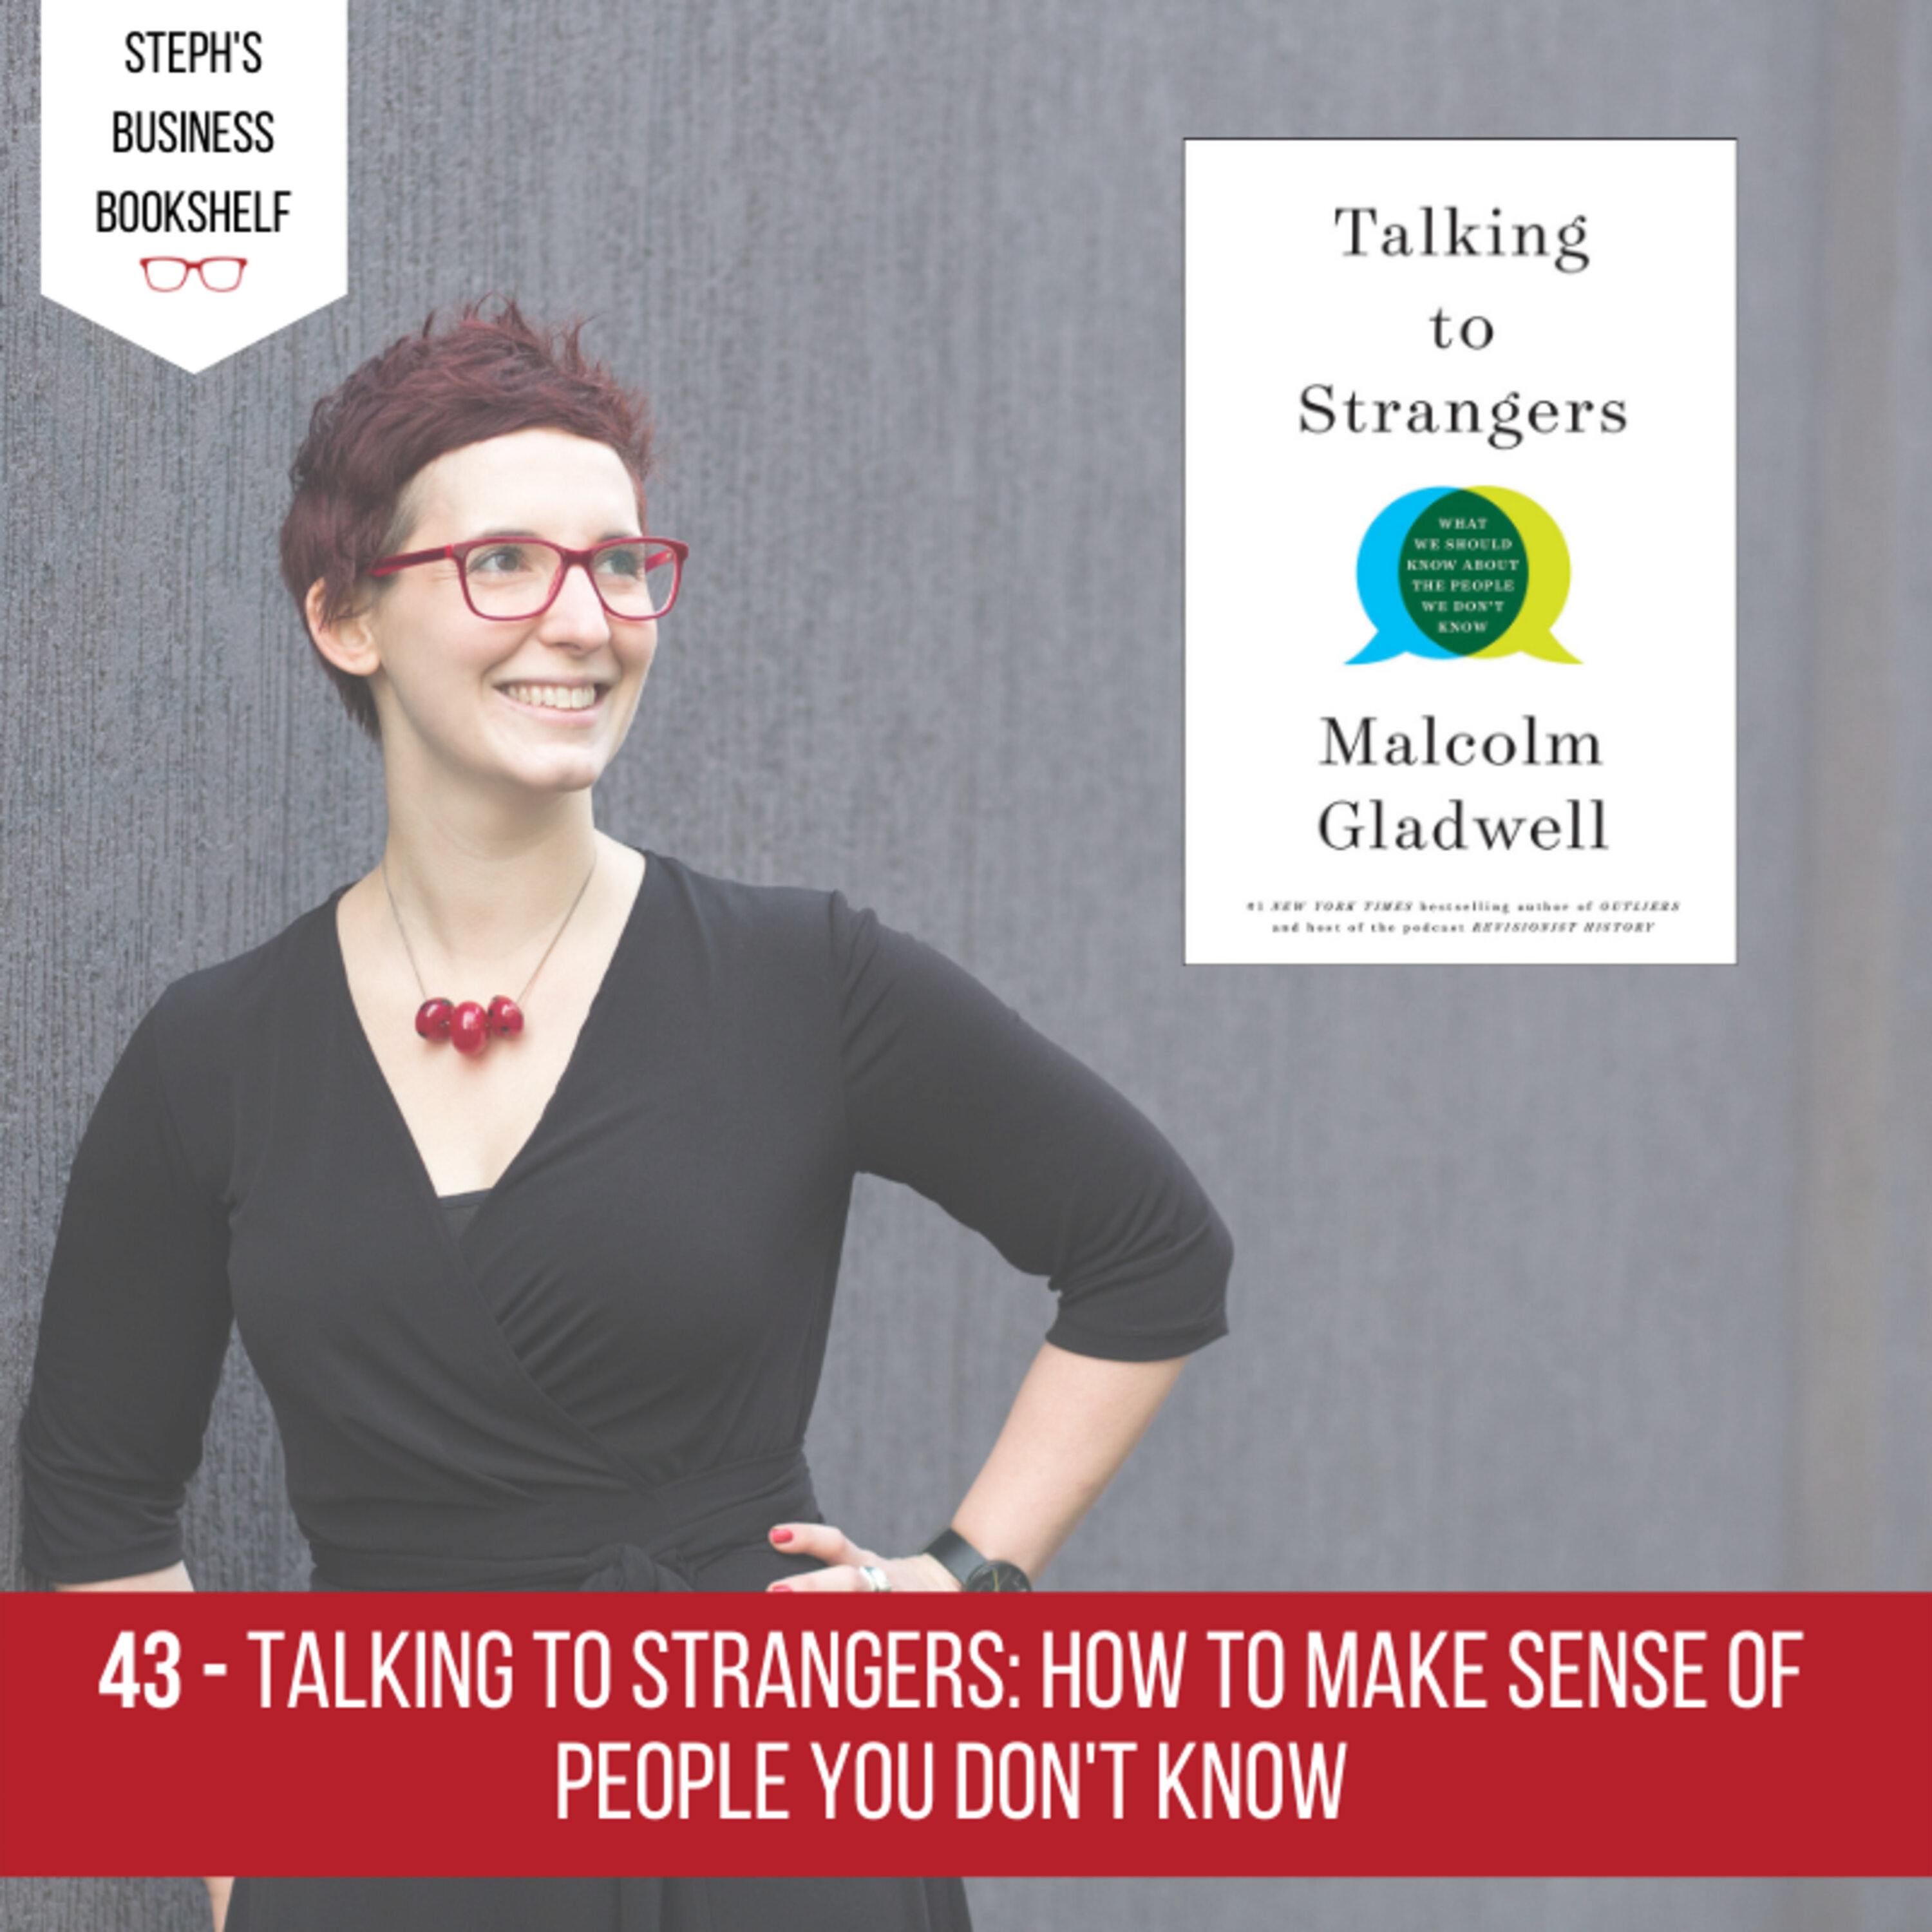 Talking to Strangers by Malcolm Gladwell: how to make sense of people you don’t know Image